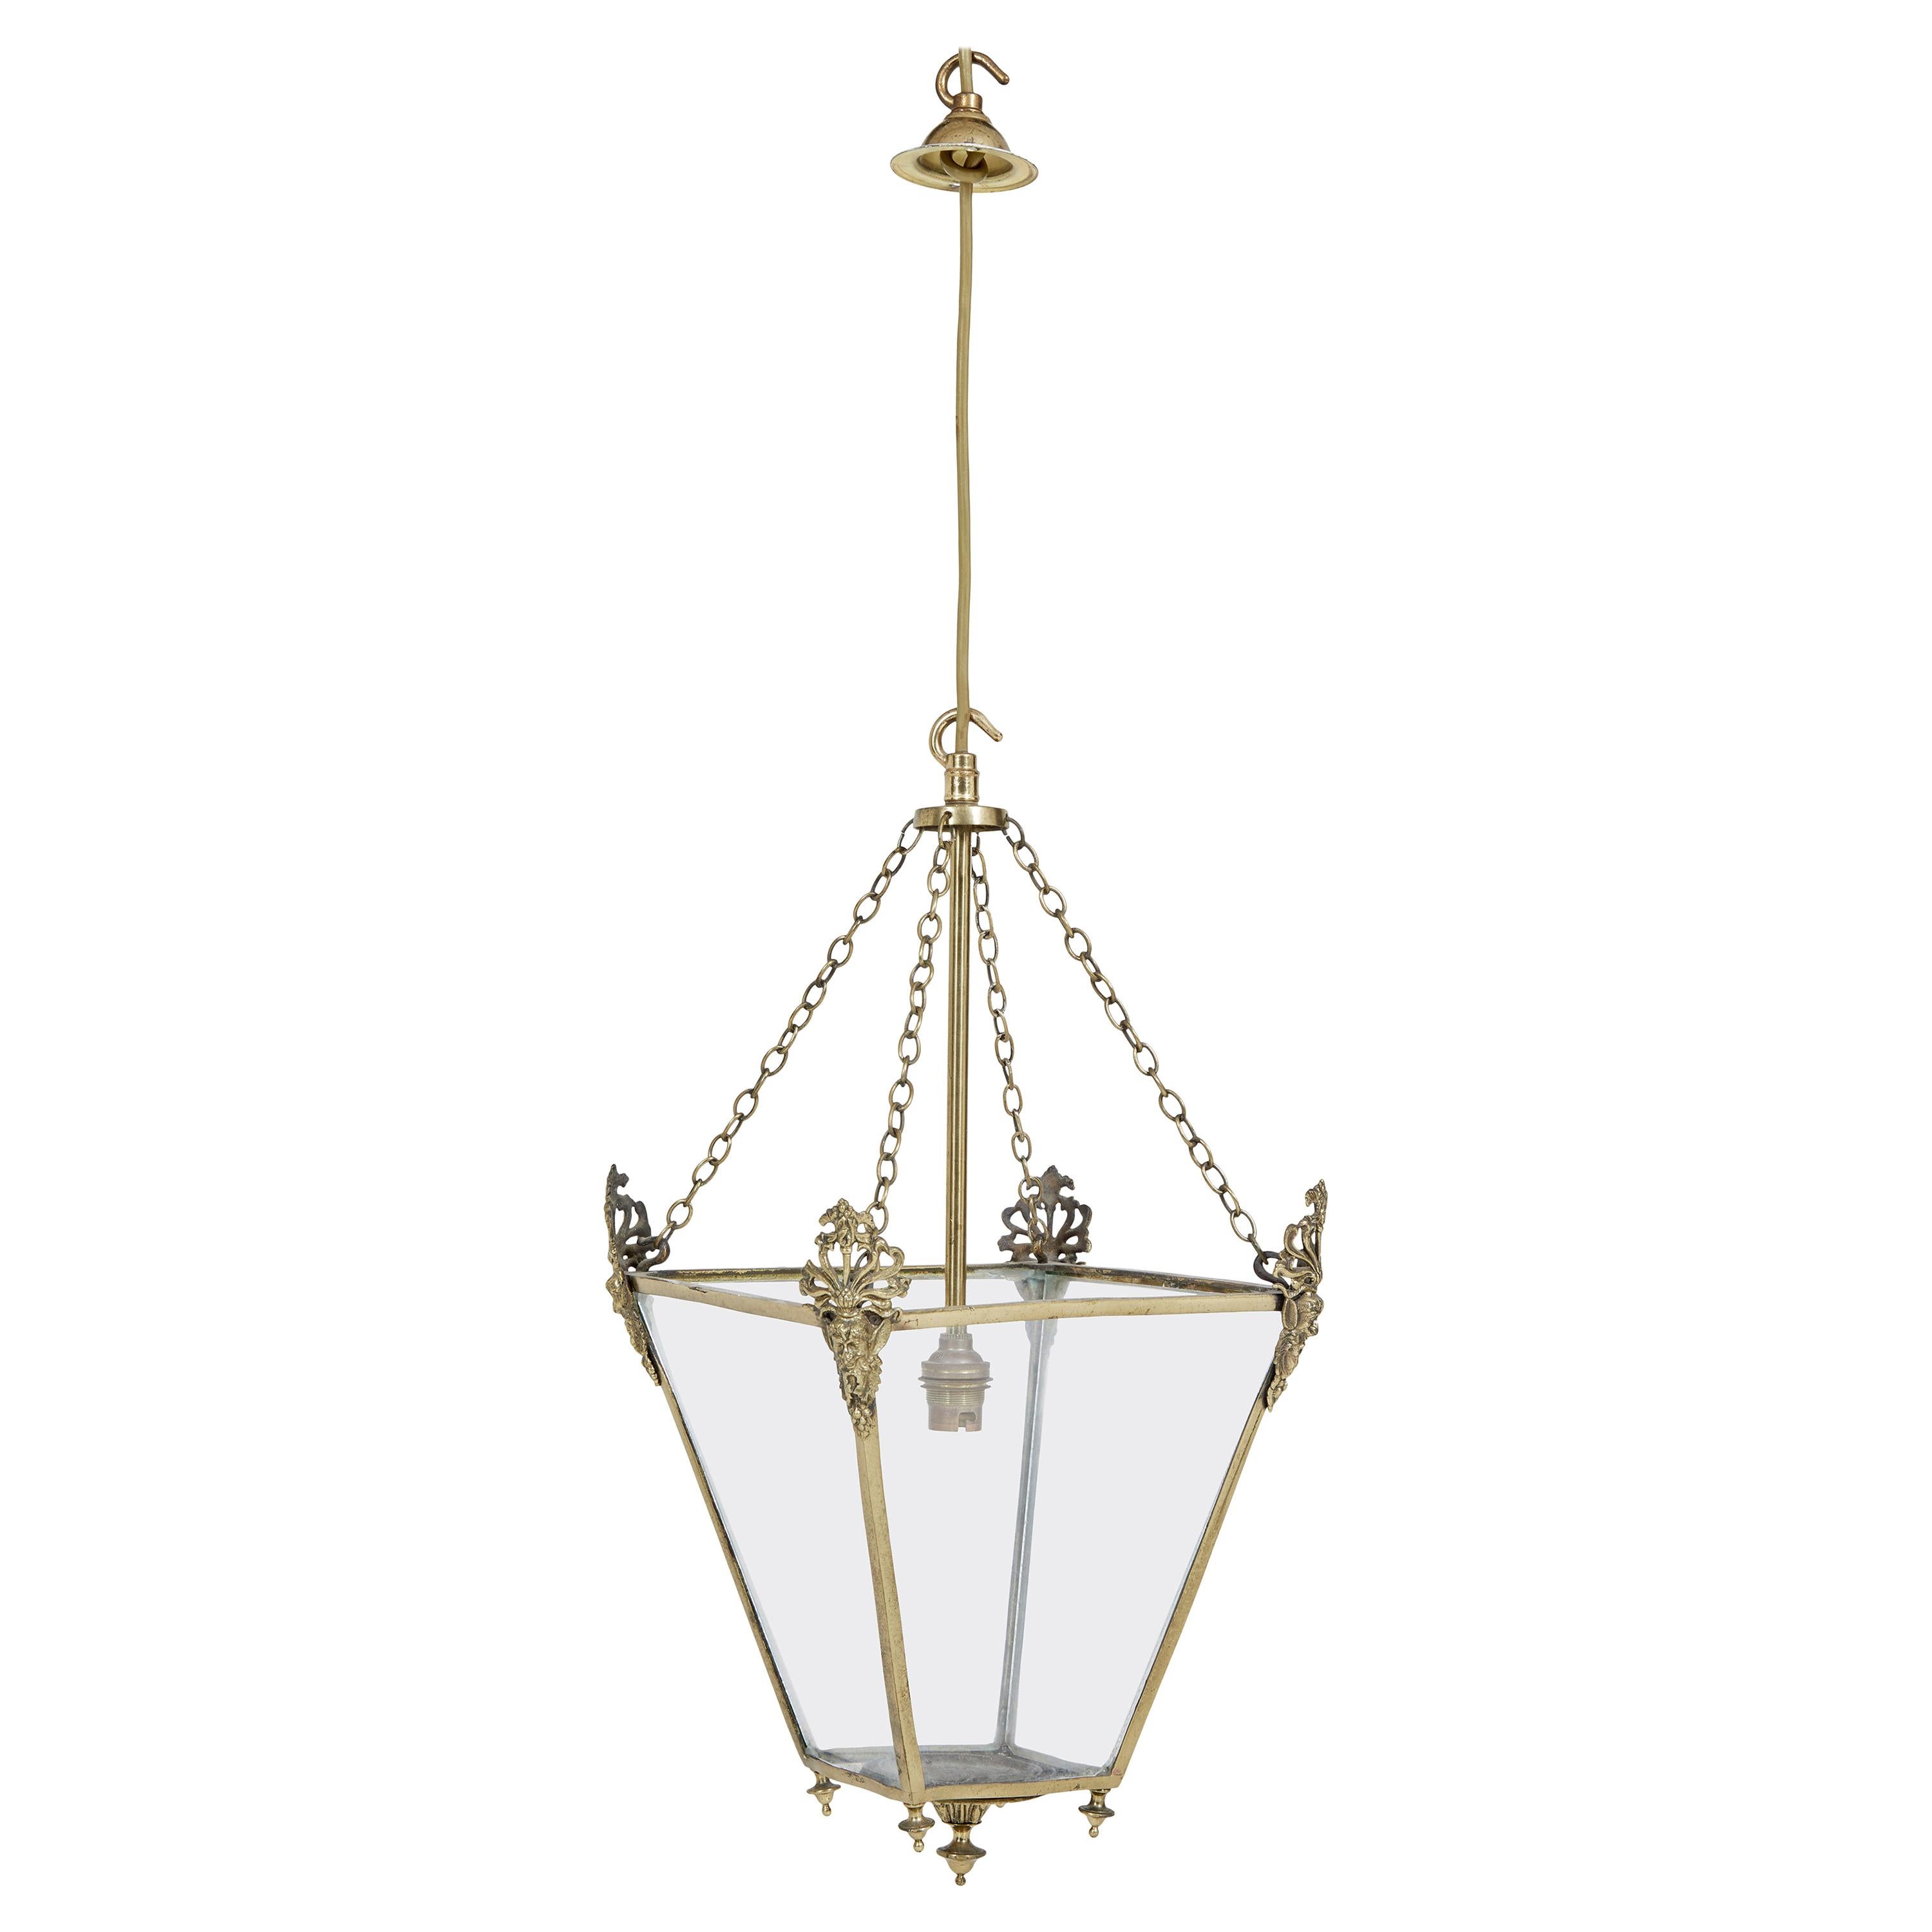 Late 19th Century Gilded and Glazed Hanging Lantern